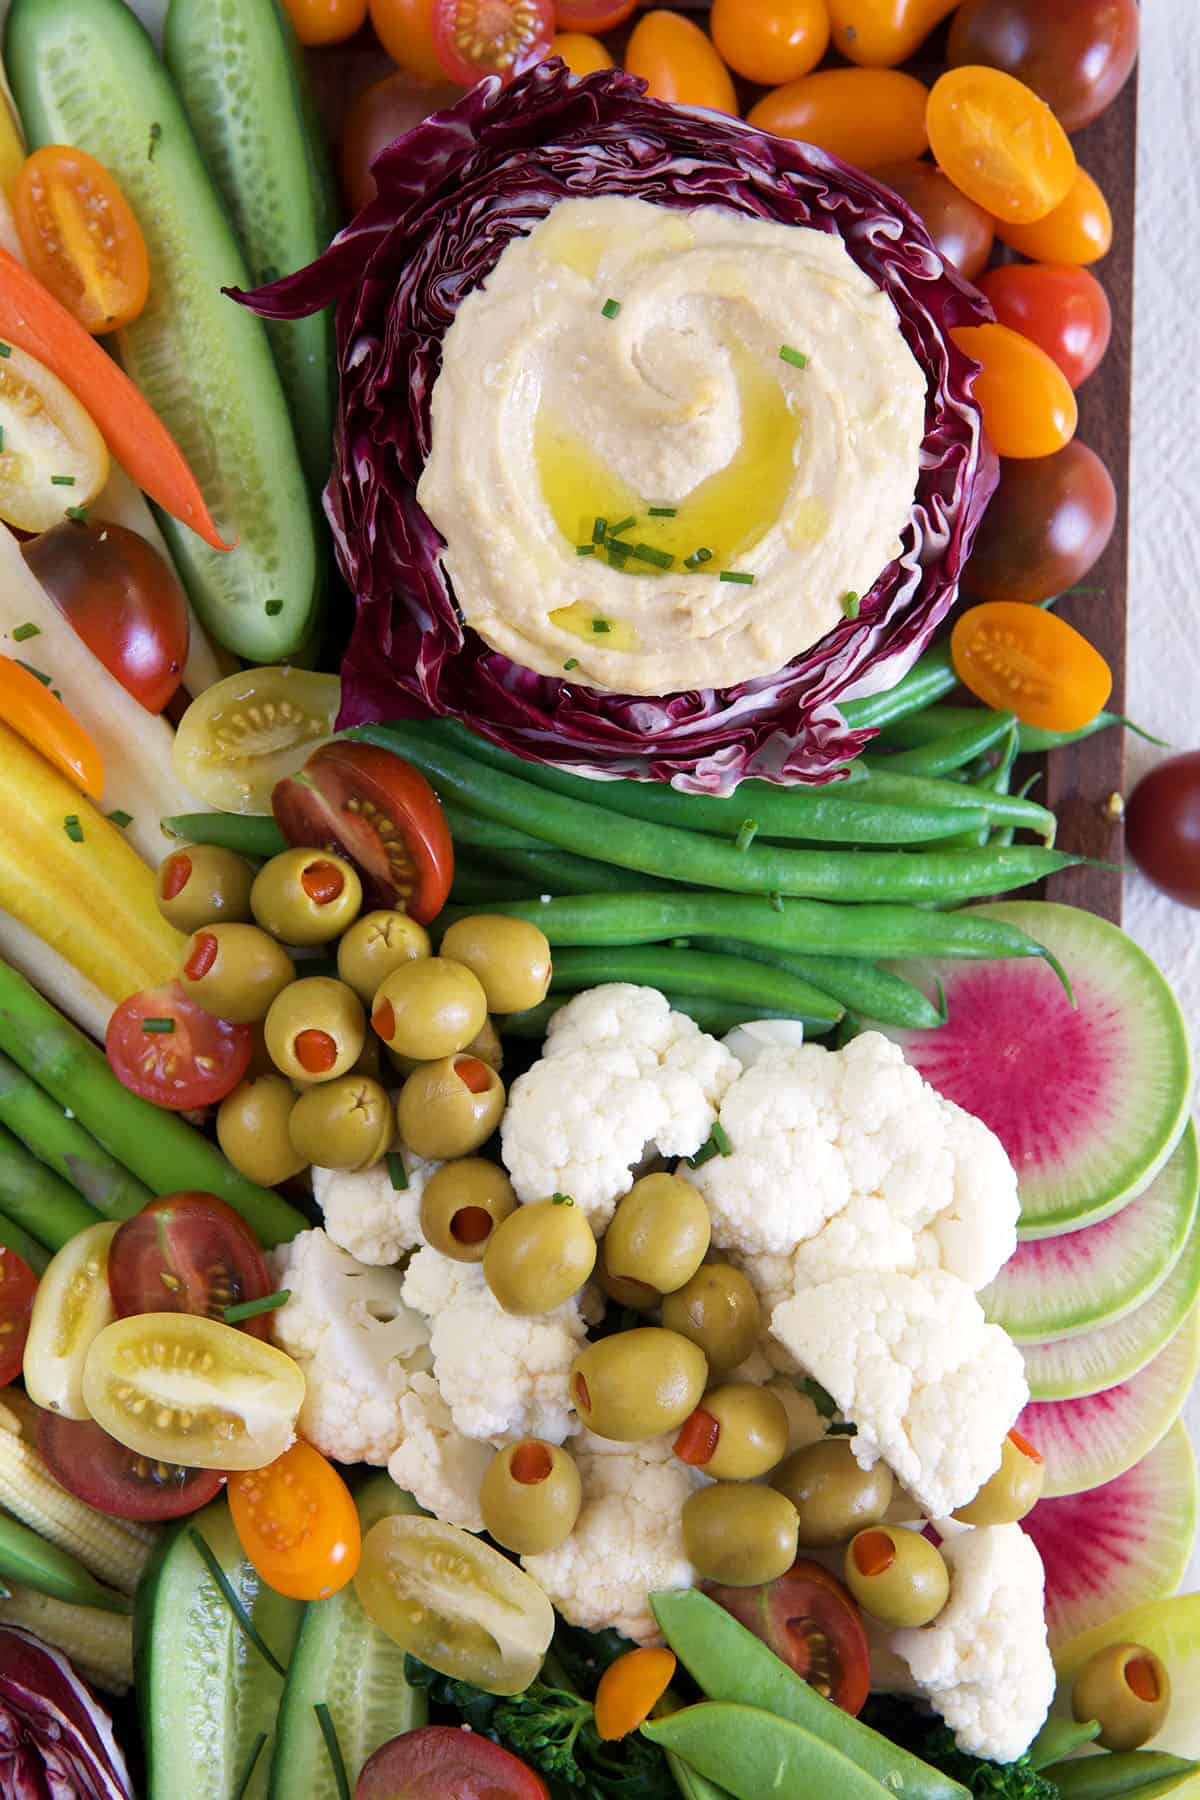 Multiple fresh veggies are placed on a platter with hummus.